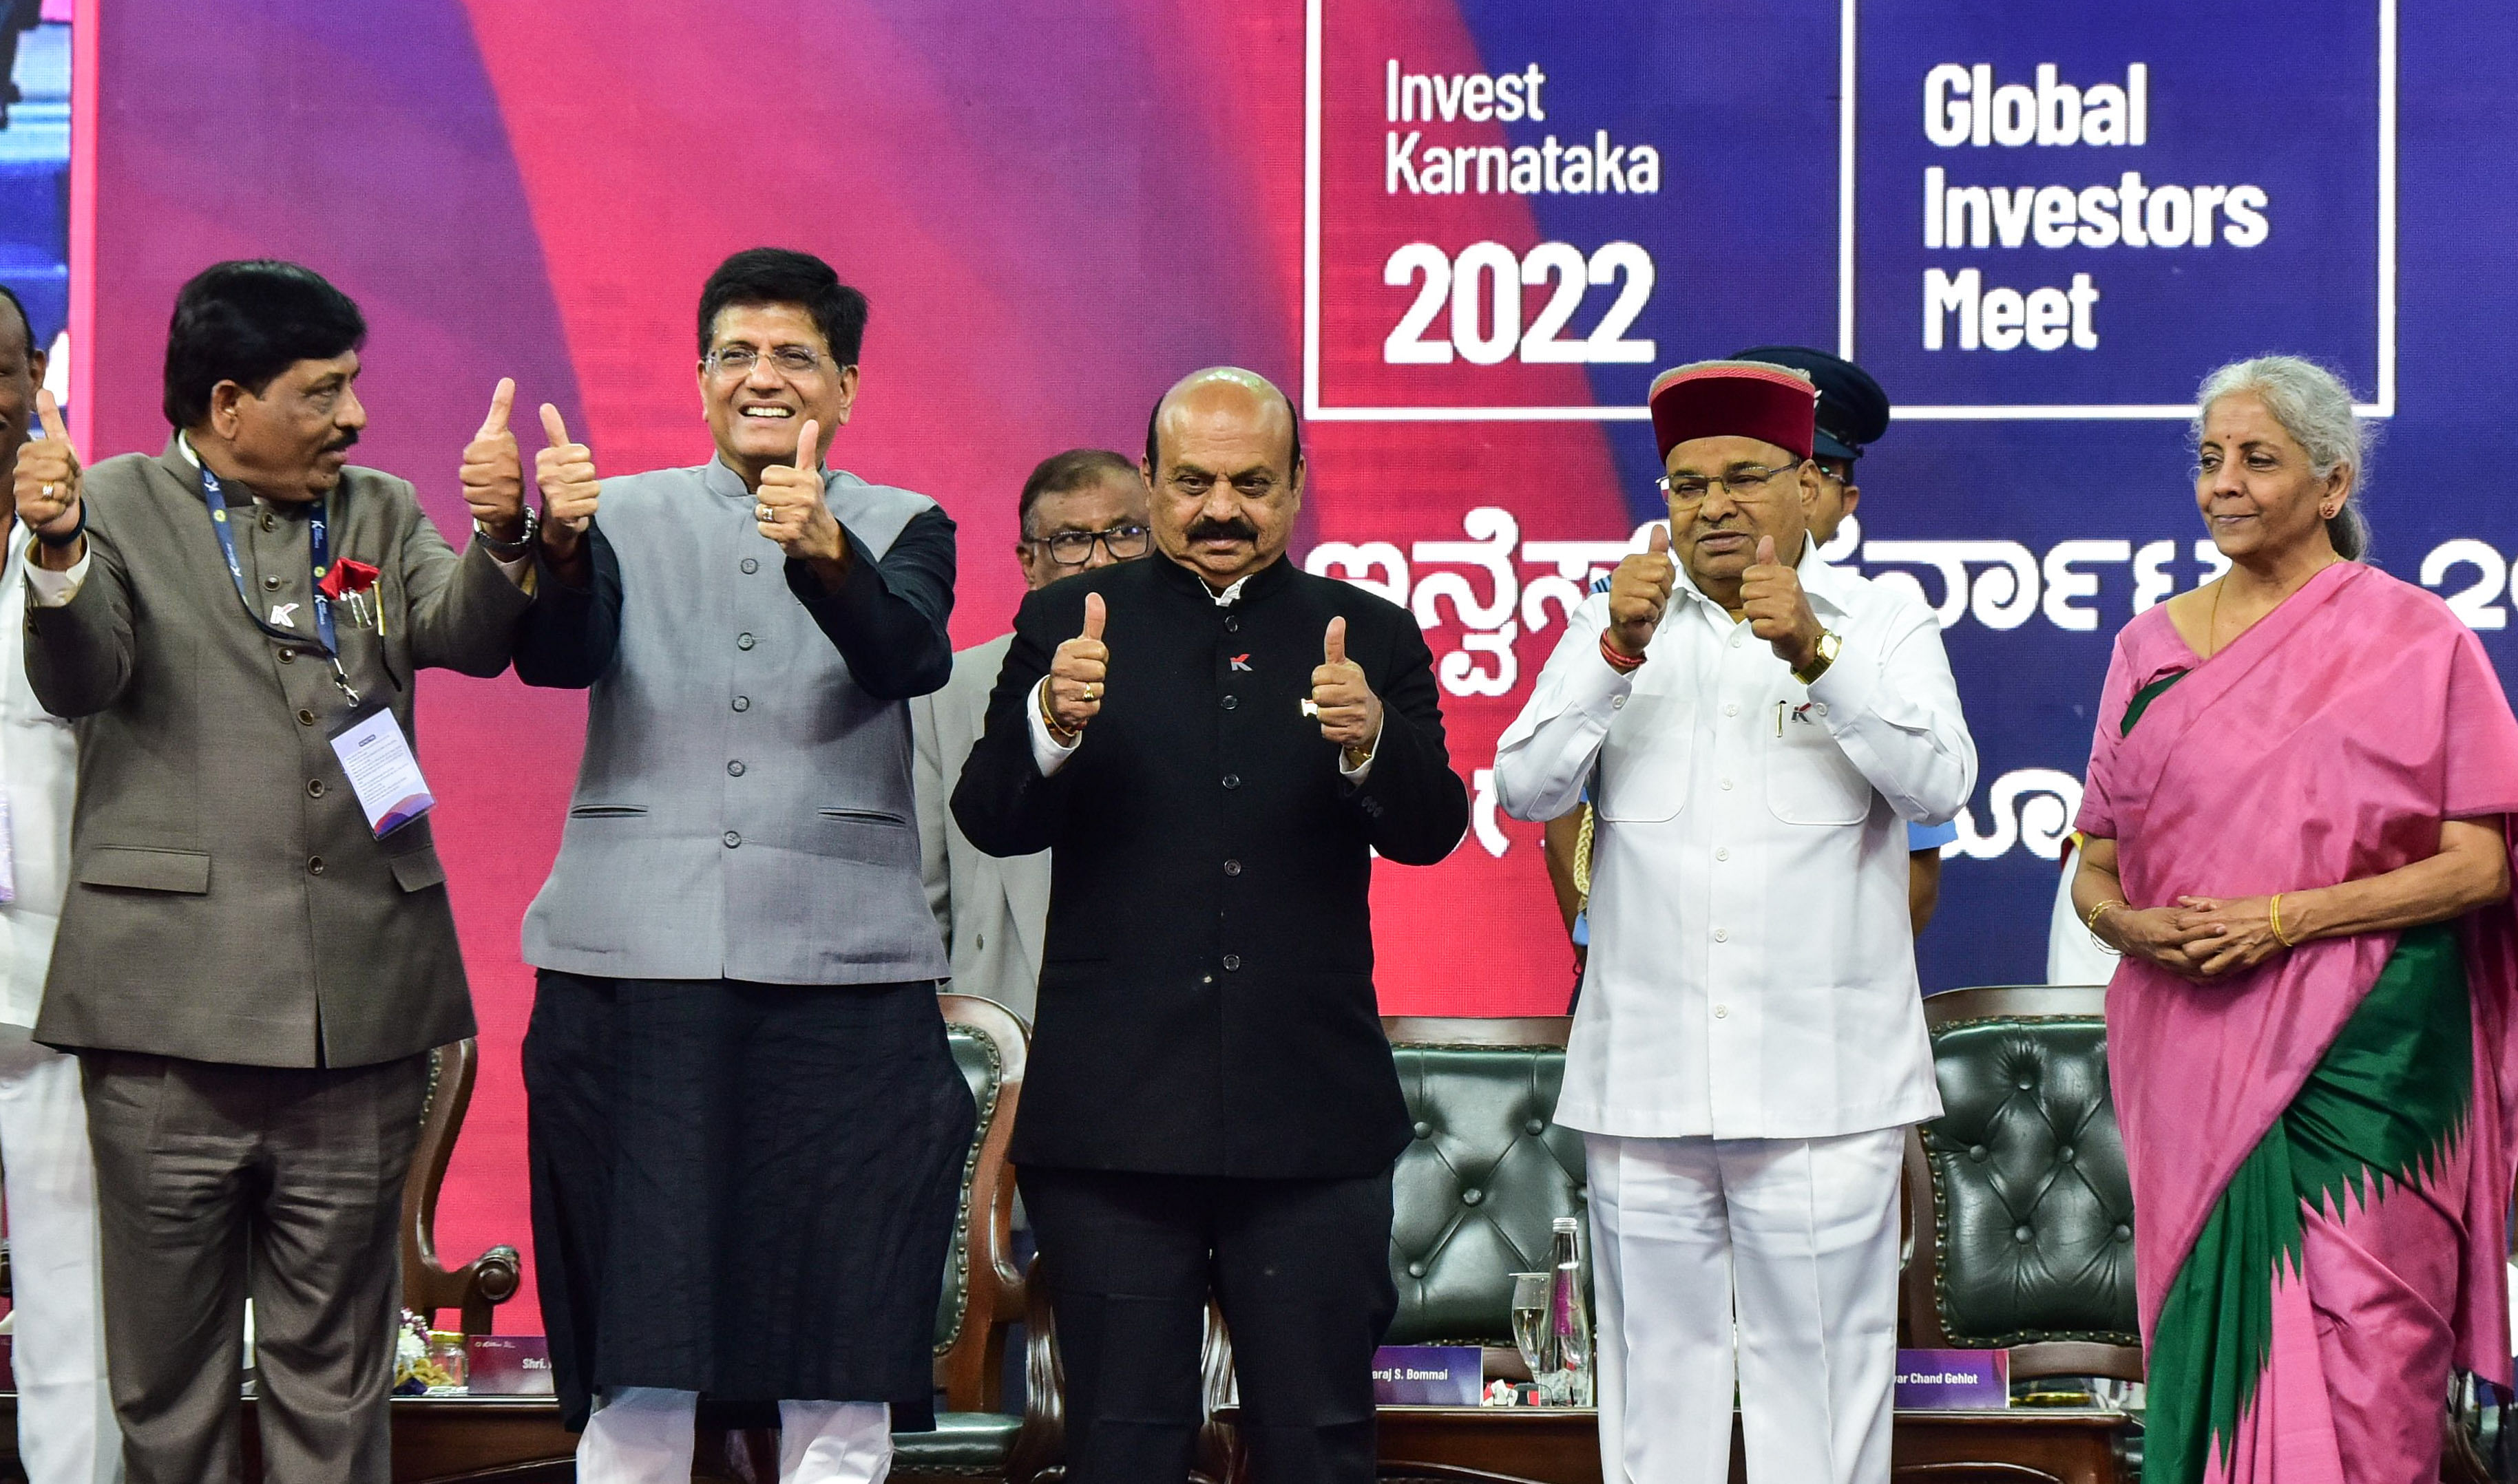 The government also boasted that this investment would create approximately 3.5 lakh jobs, which seemed like a large number and suggested that the government was heroically addressing the most pressing issue facing Karnataka and indeed India today—that of employment. Credit: DH Photo